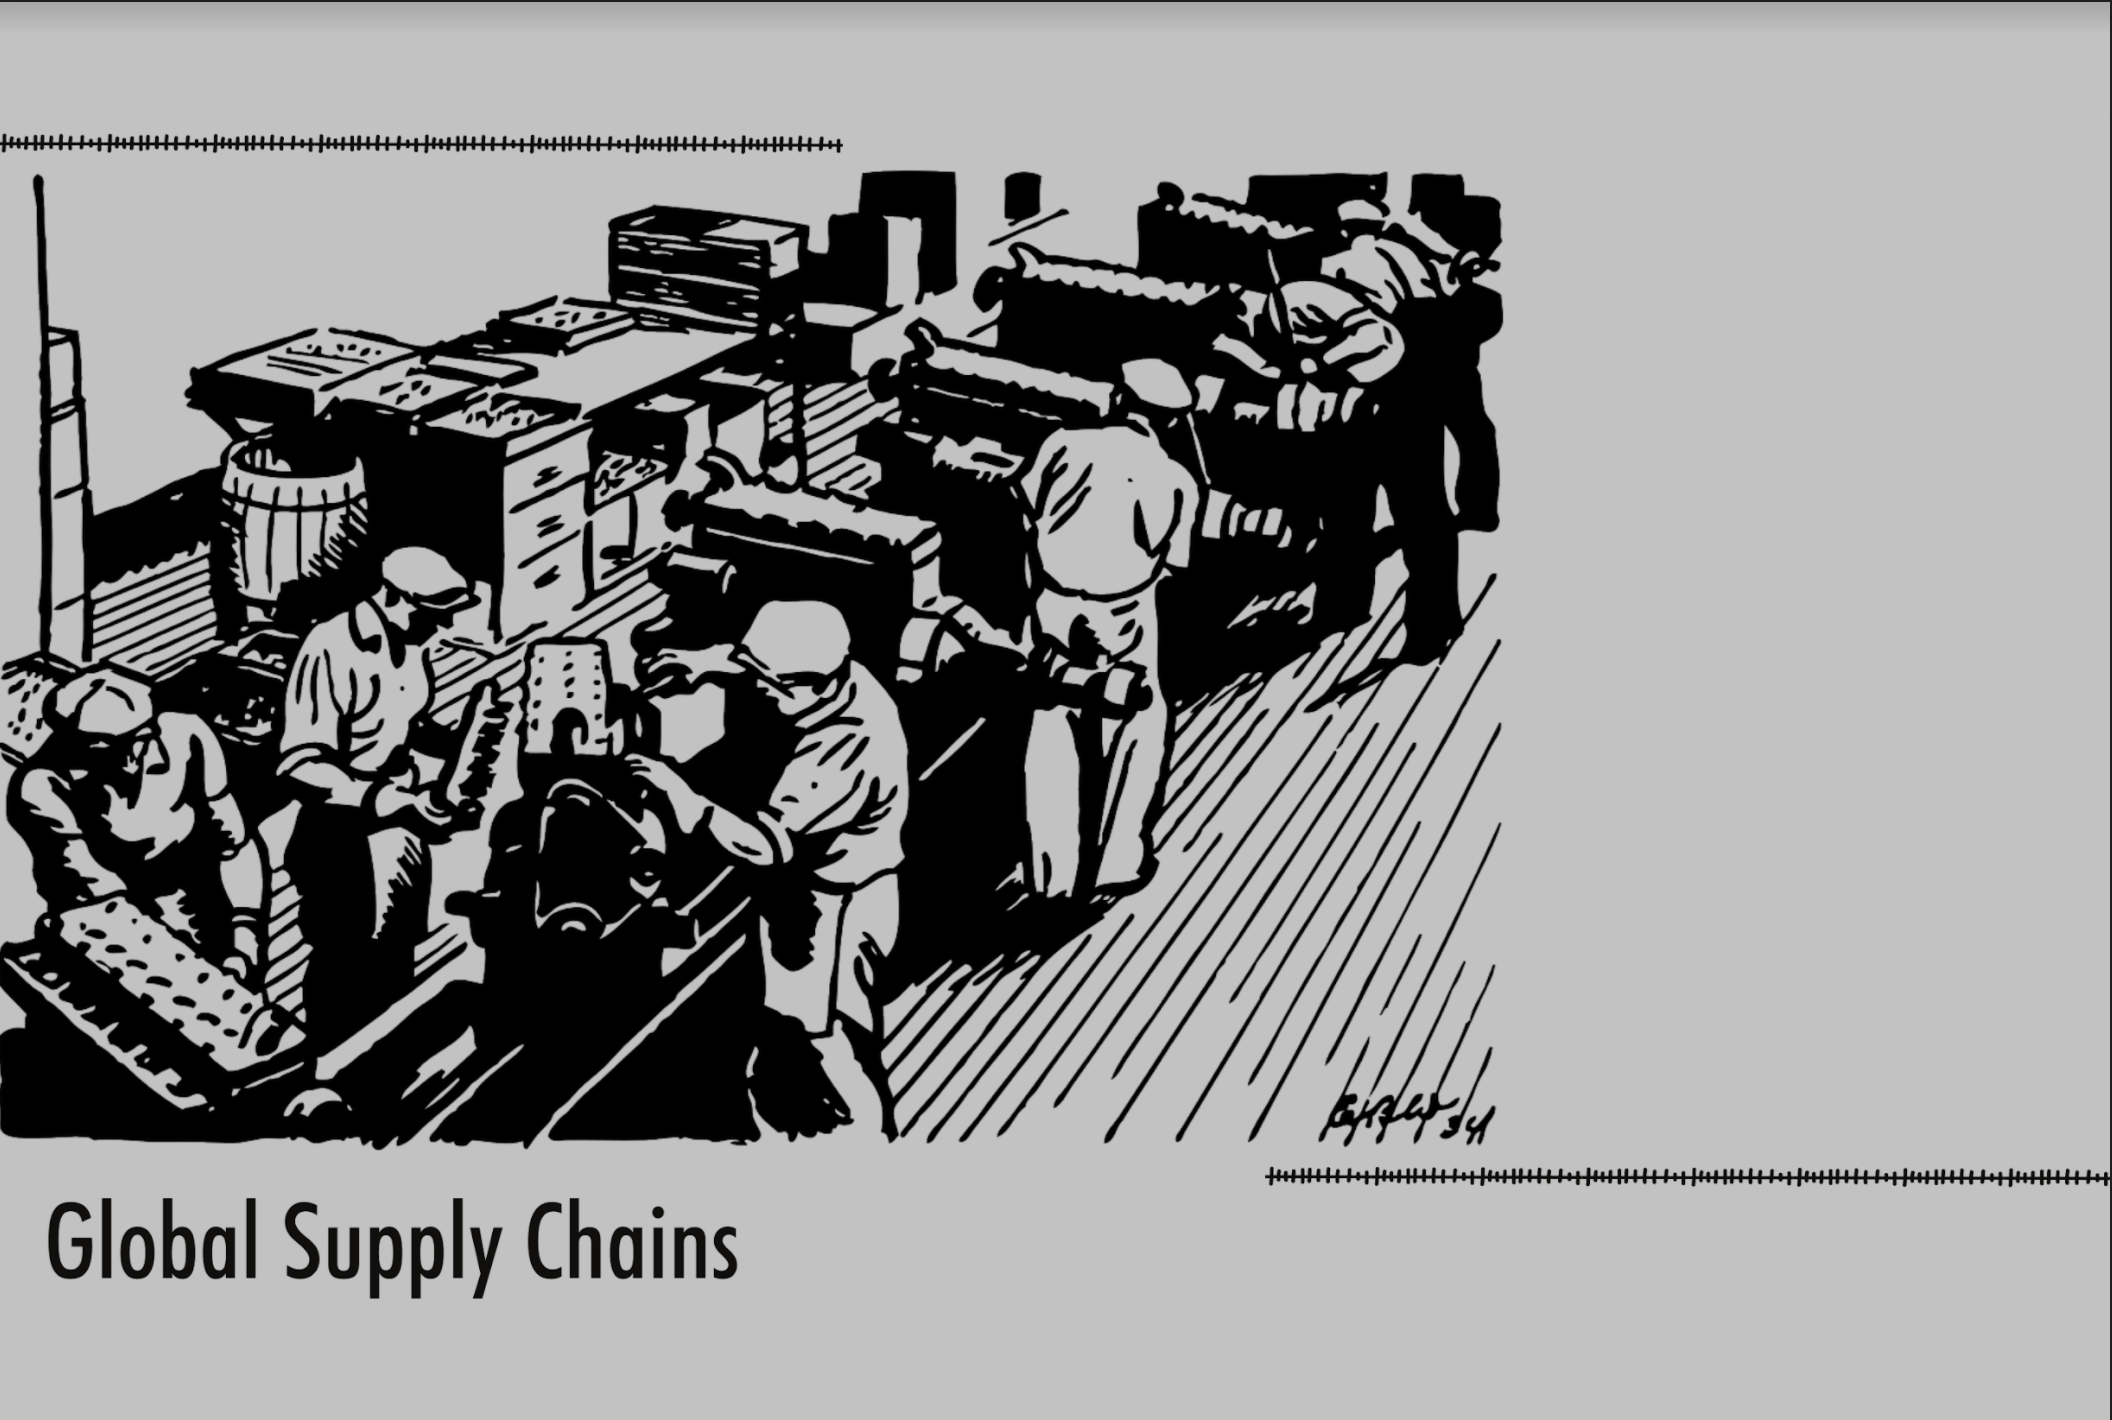 Human Trafficking in Global Supply Chains